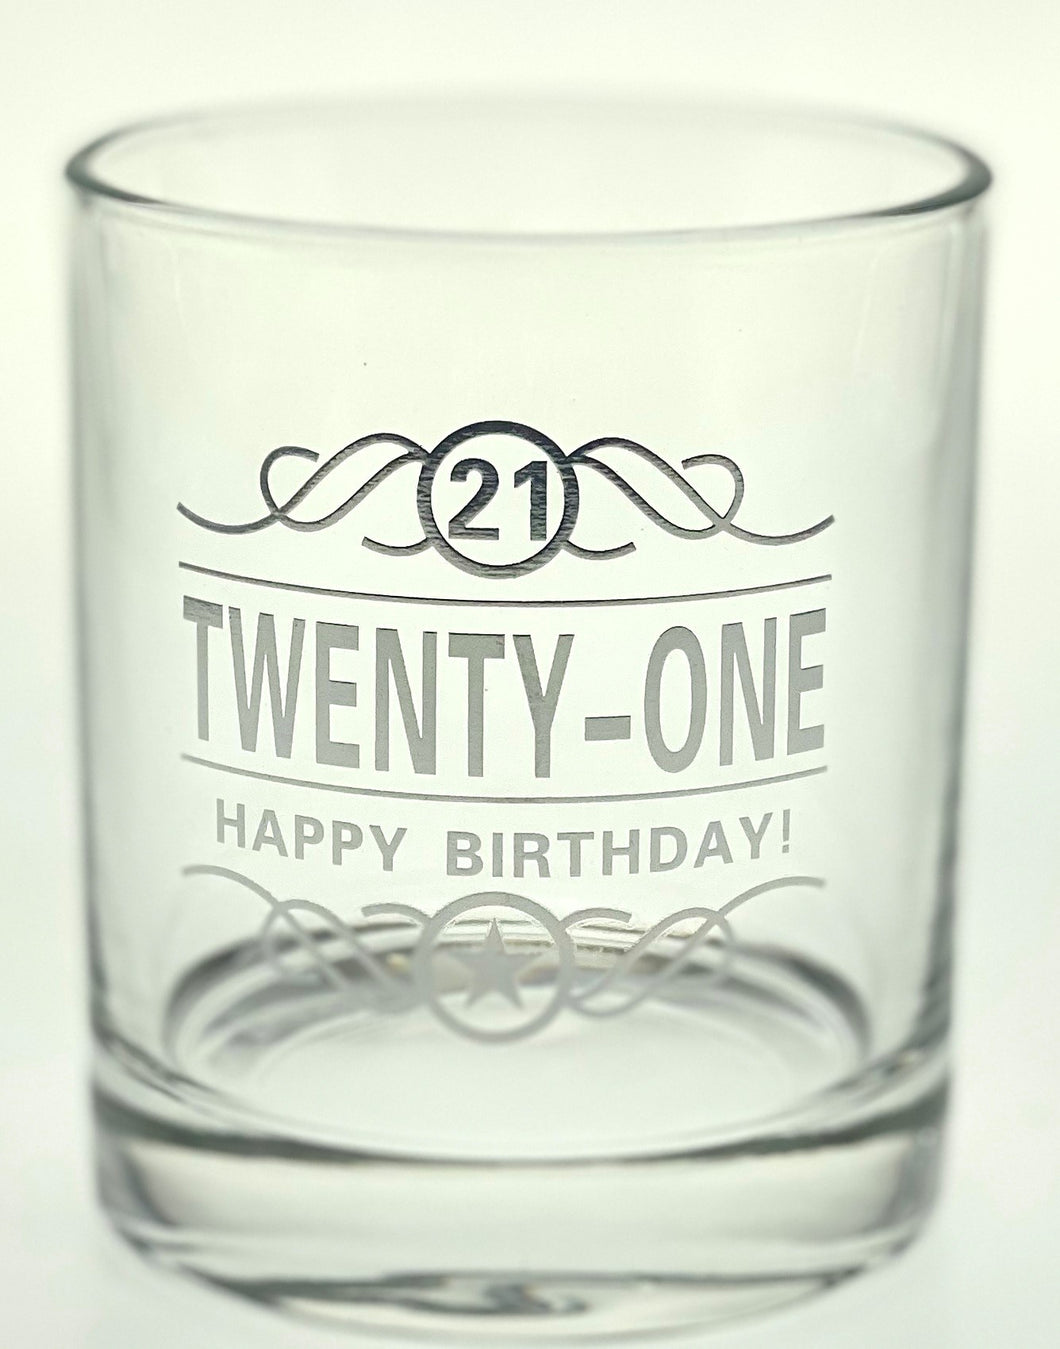 21st Birthday Scotch Glass - 13oz/350ml Perfect for that 21st Birthday present, presented in a silk-lined gift box ready to give. Rosies Gifts, Mosgiel, Dunedin